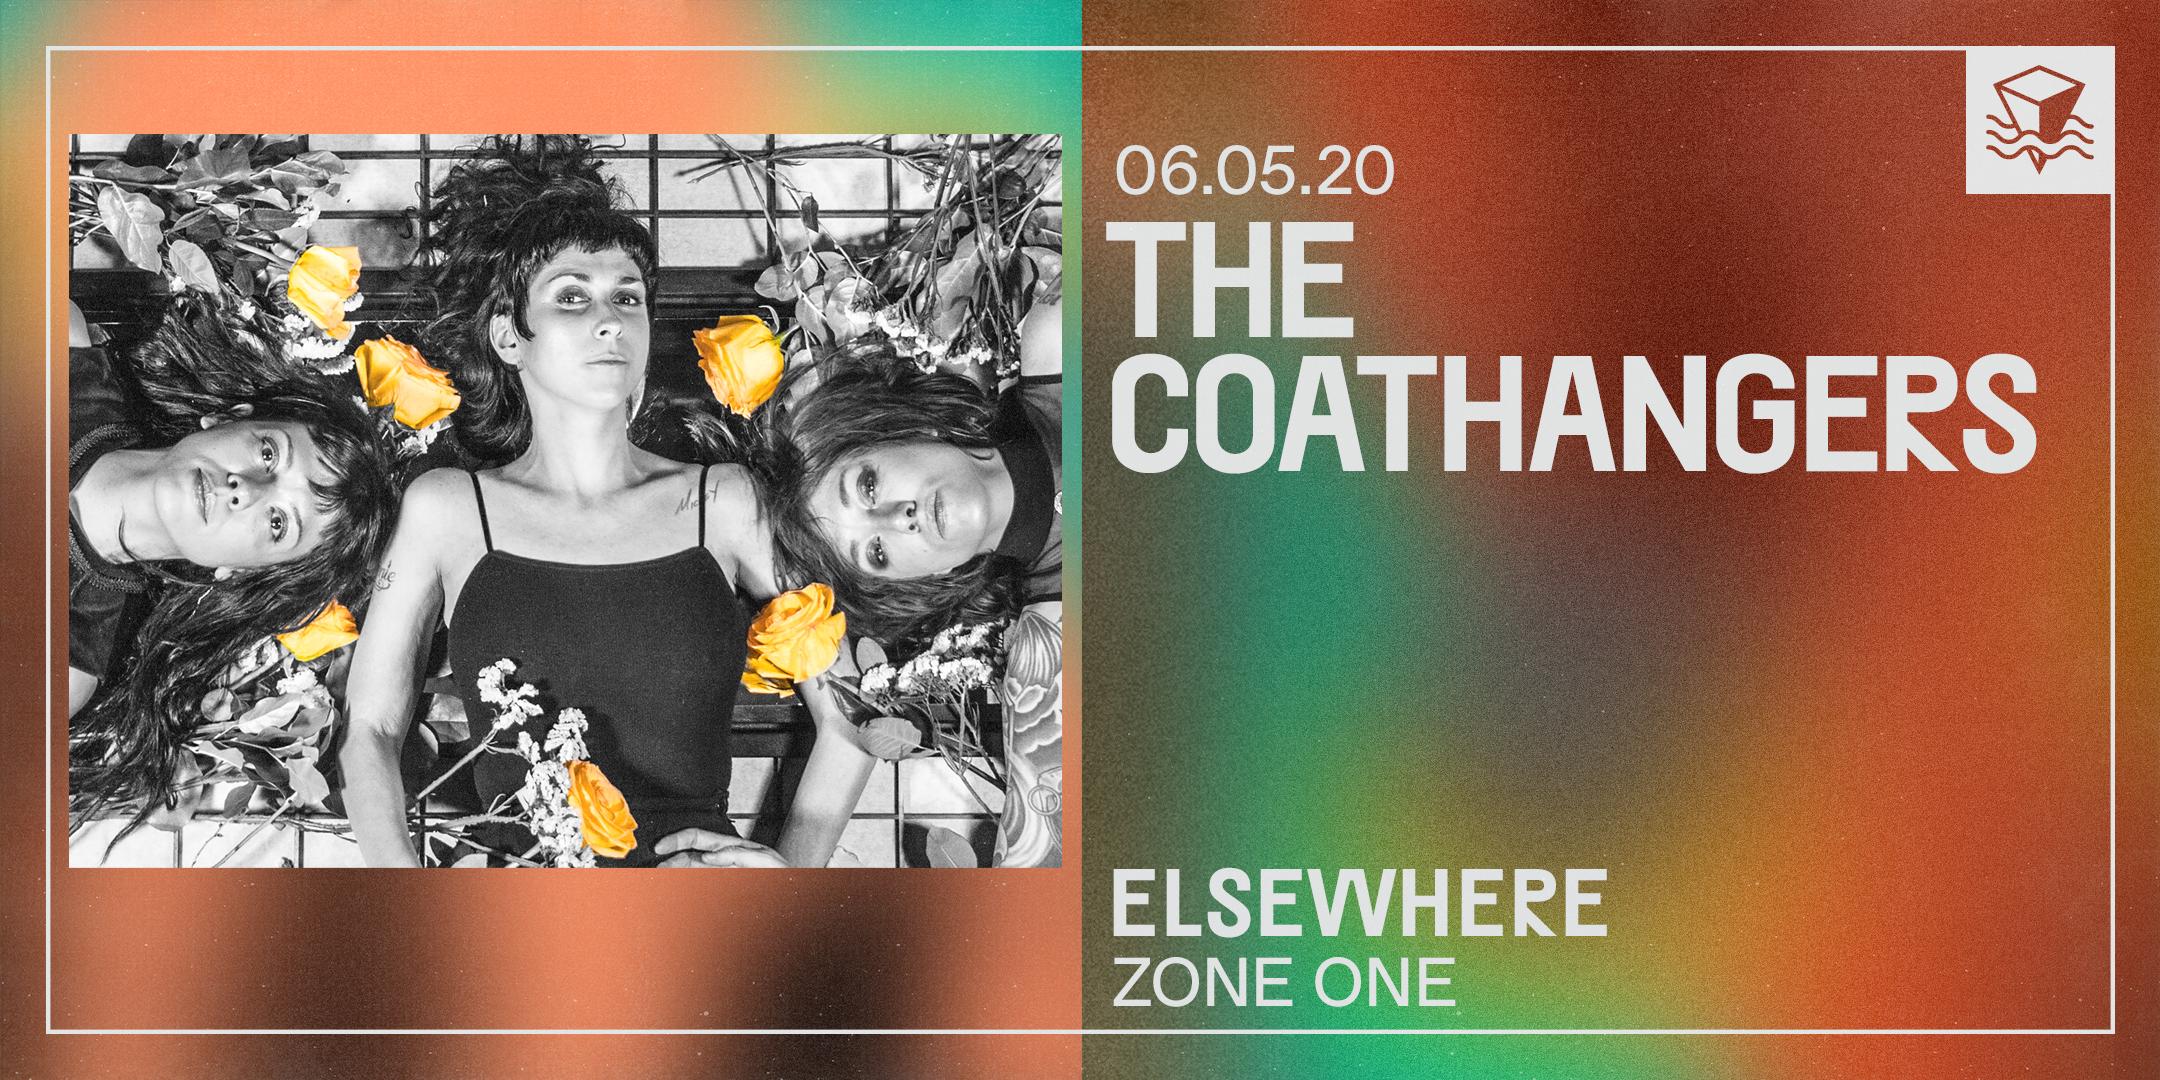 The Coathangers @ Elsewhere (Zone One)